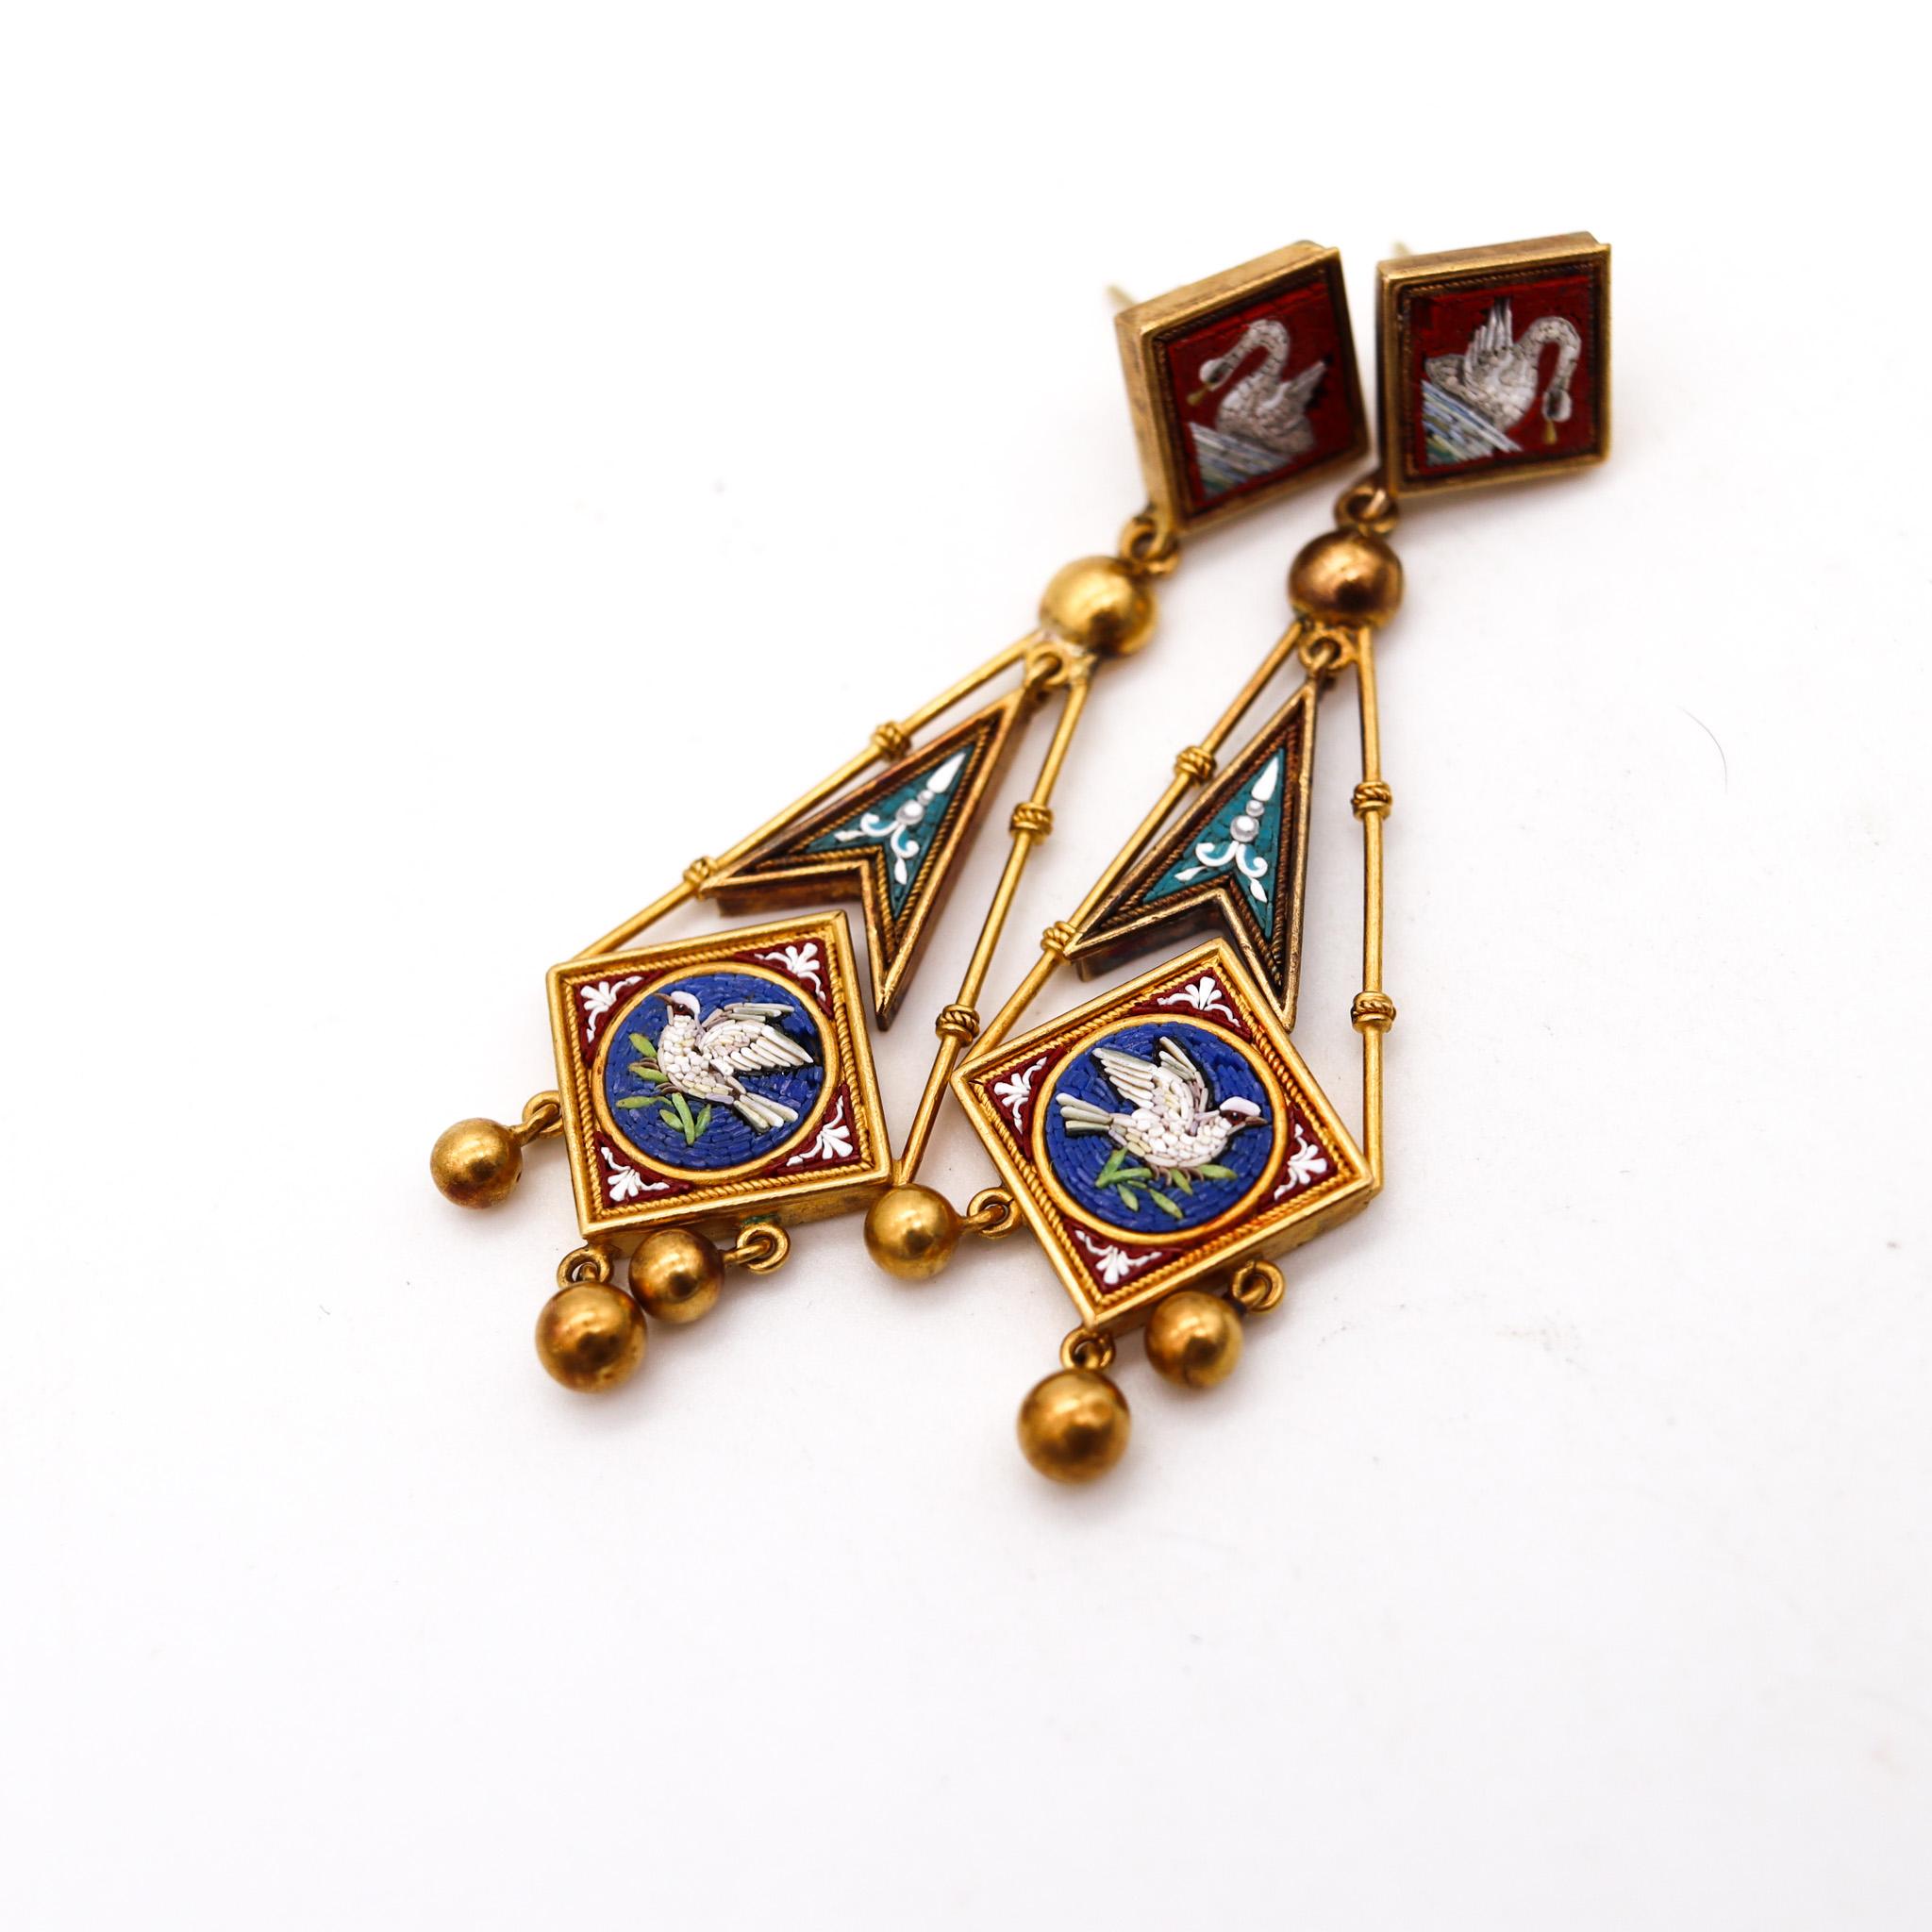 Classical Roman Roman Revival 1850 Papal States Earrings In 18Kt Yellow Gold Swan Micro Mosaic